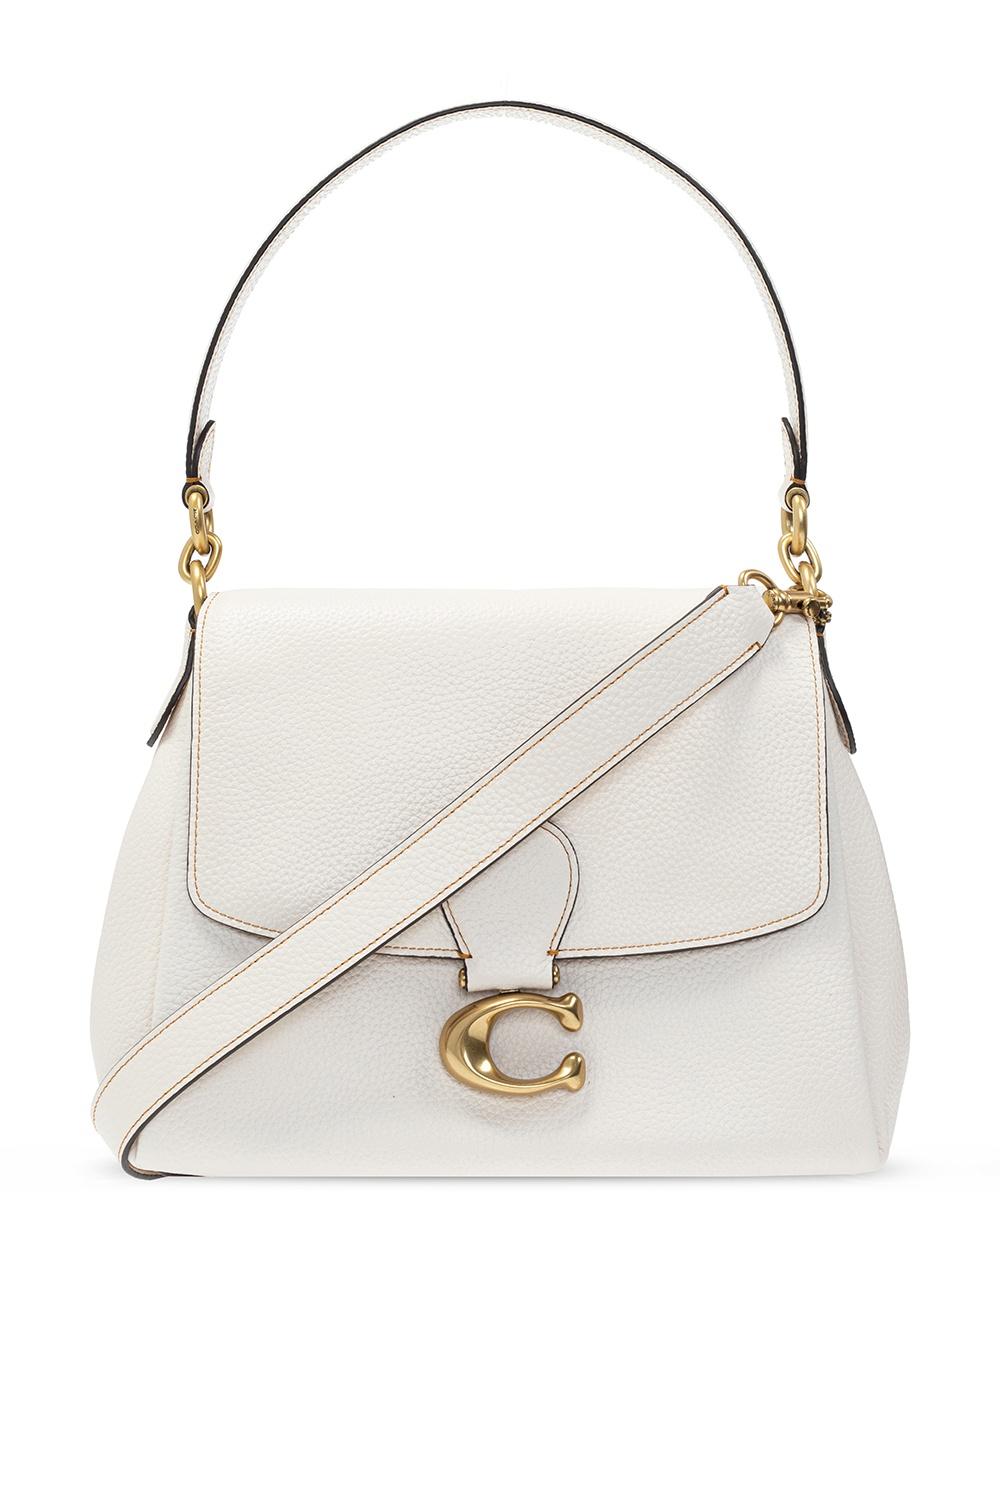 COACH 'may' Shoulder Bag in White | Lyst UK